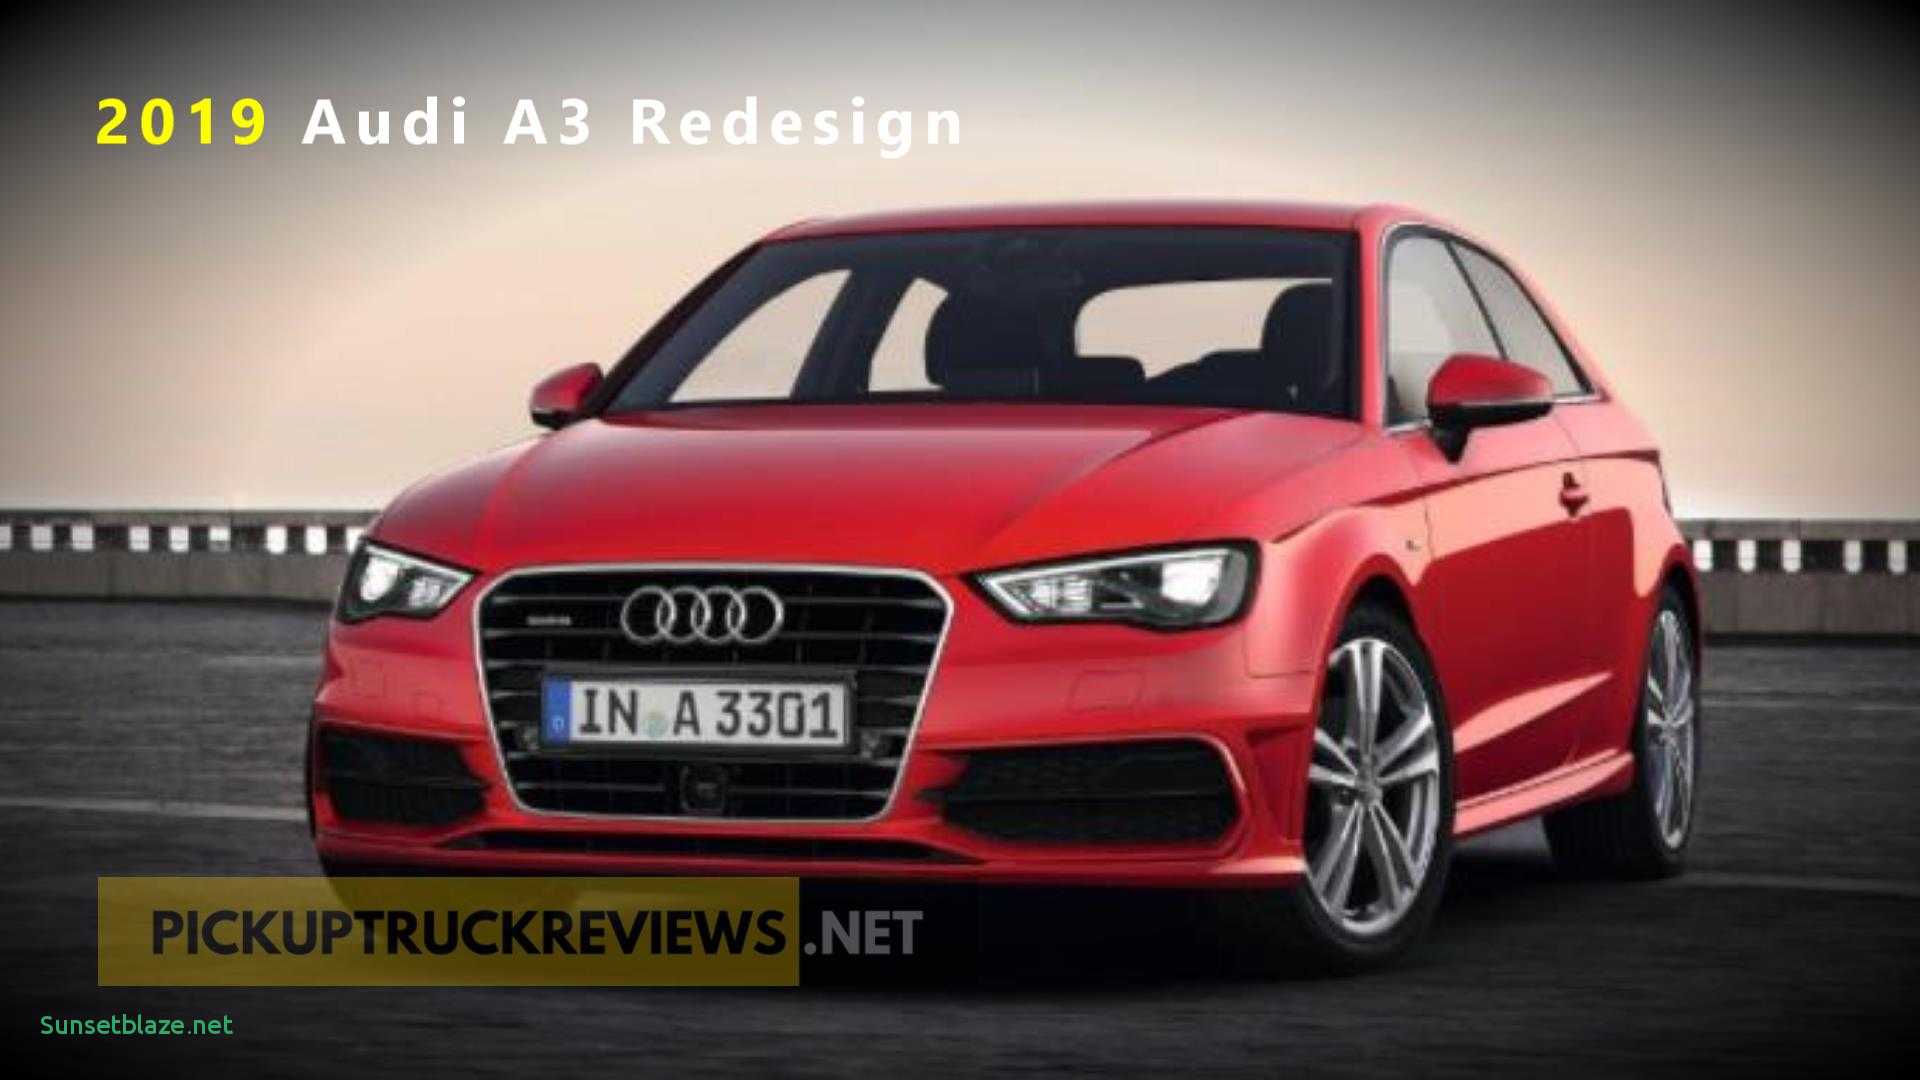 Audi A3 Redesign Specs and Prices Lovely Of Audi A3 2019